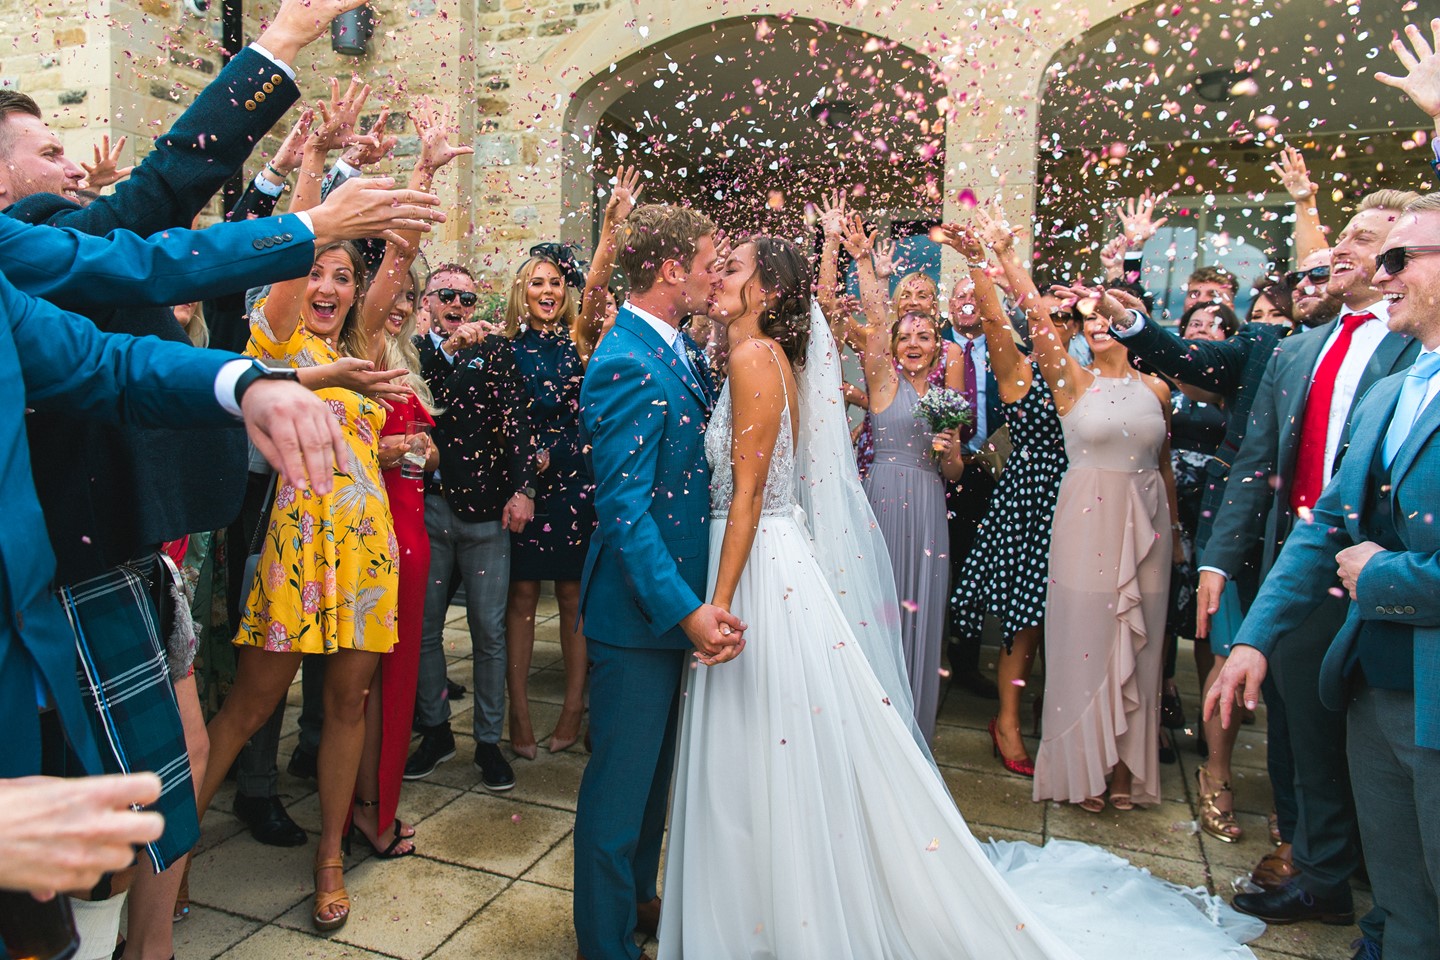 Bride and groom surrounded by confetti and wedding guests